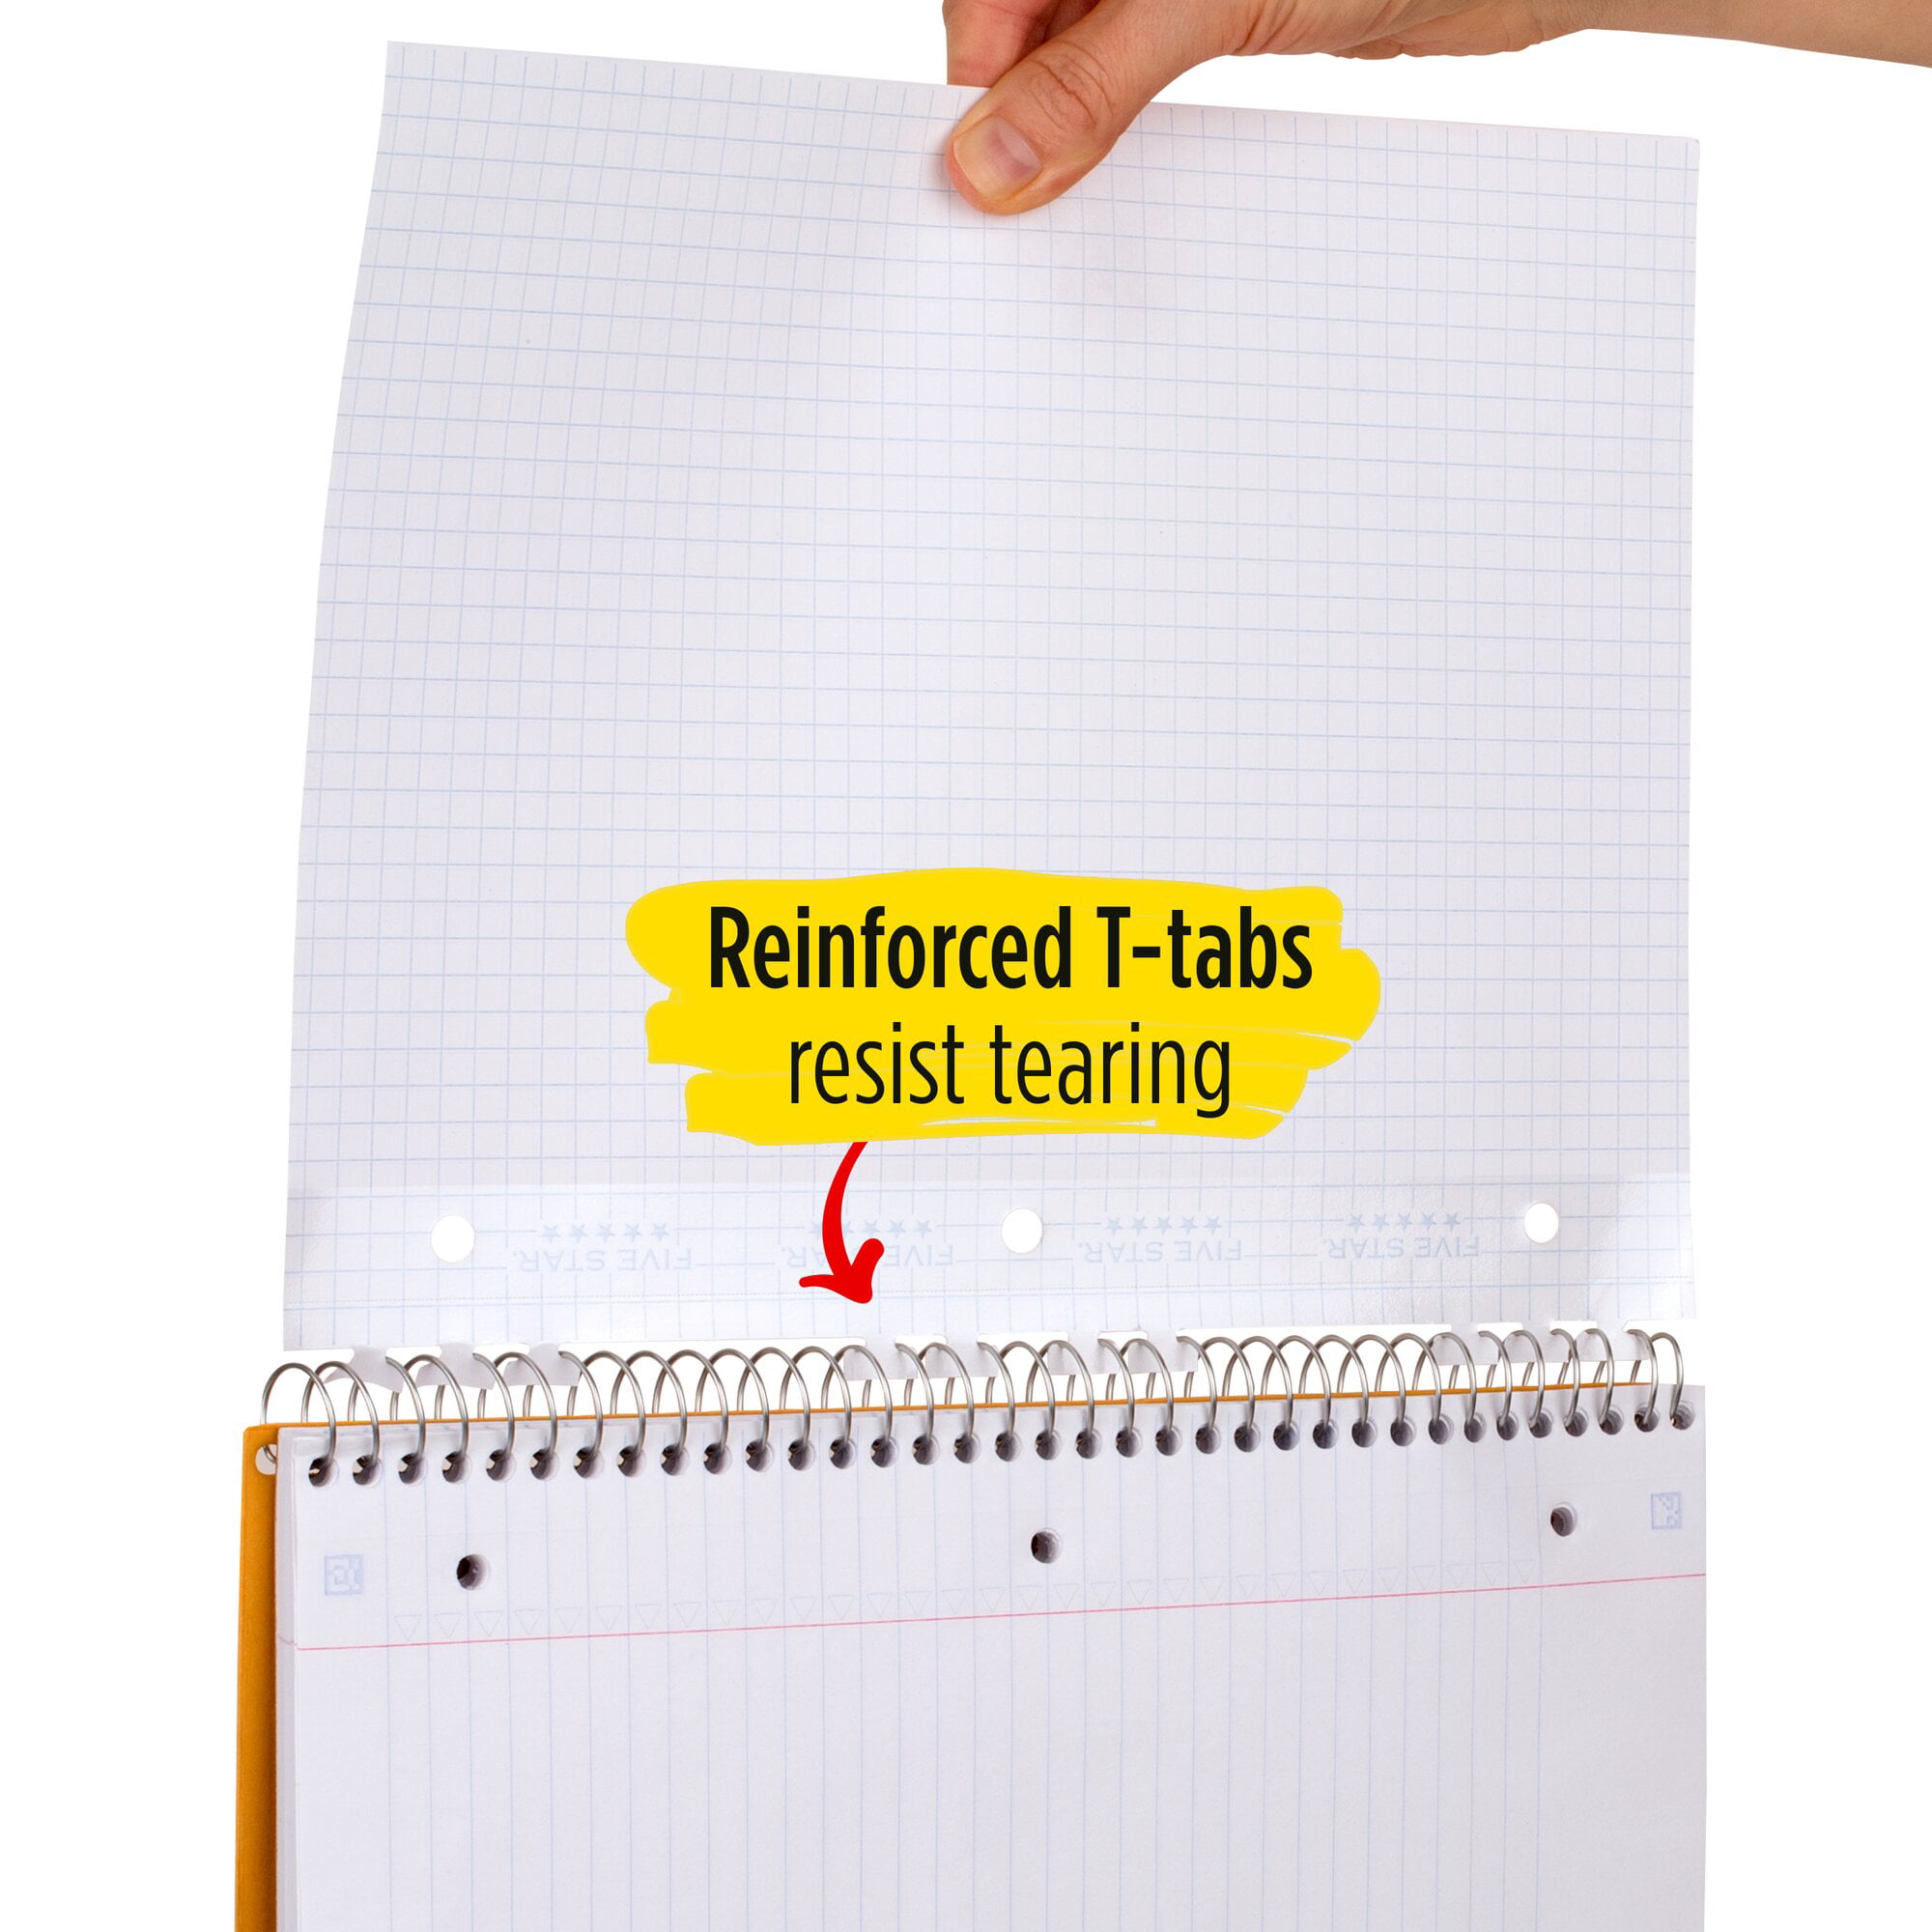 Five Star Reinforced Insertable Notebook Paper, College Ruled, 11 1/2 inch x 8 inch, 75 Sheets/Pack, White